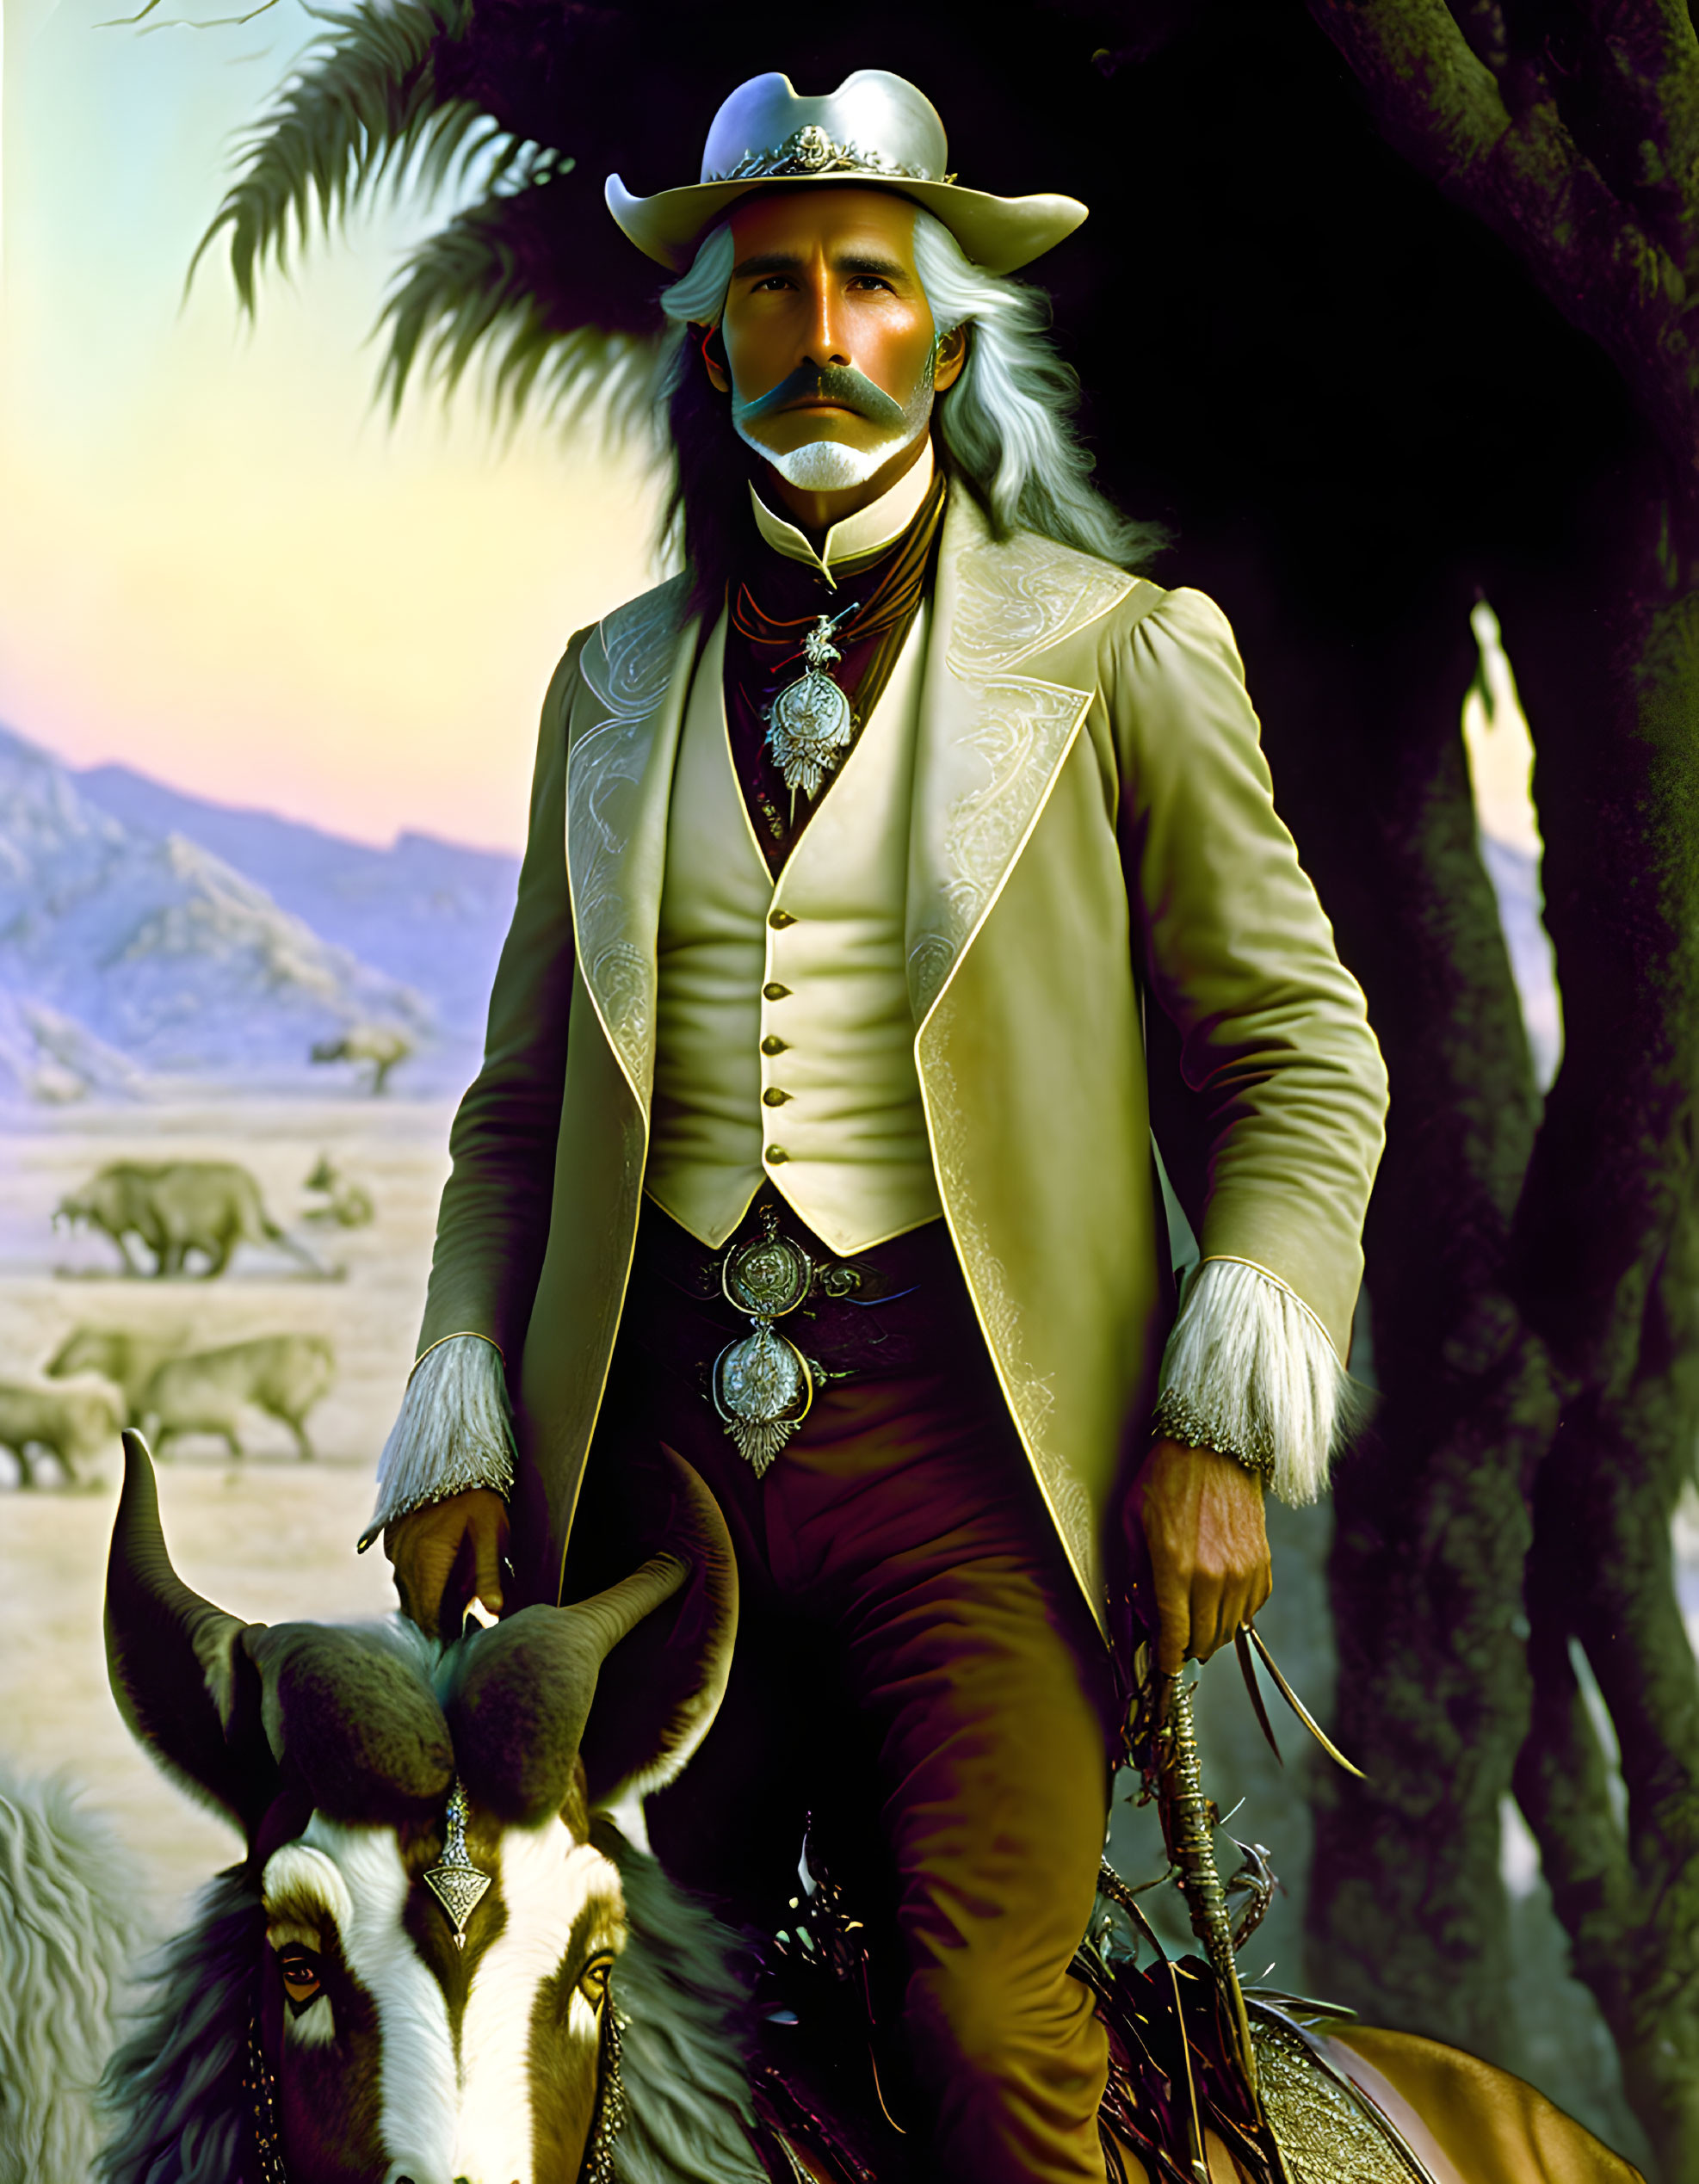 Man in white western outfit with concho belt and wide-brimmed hat by tree on plains.